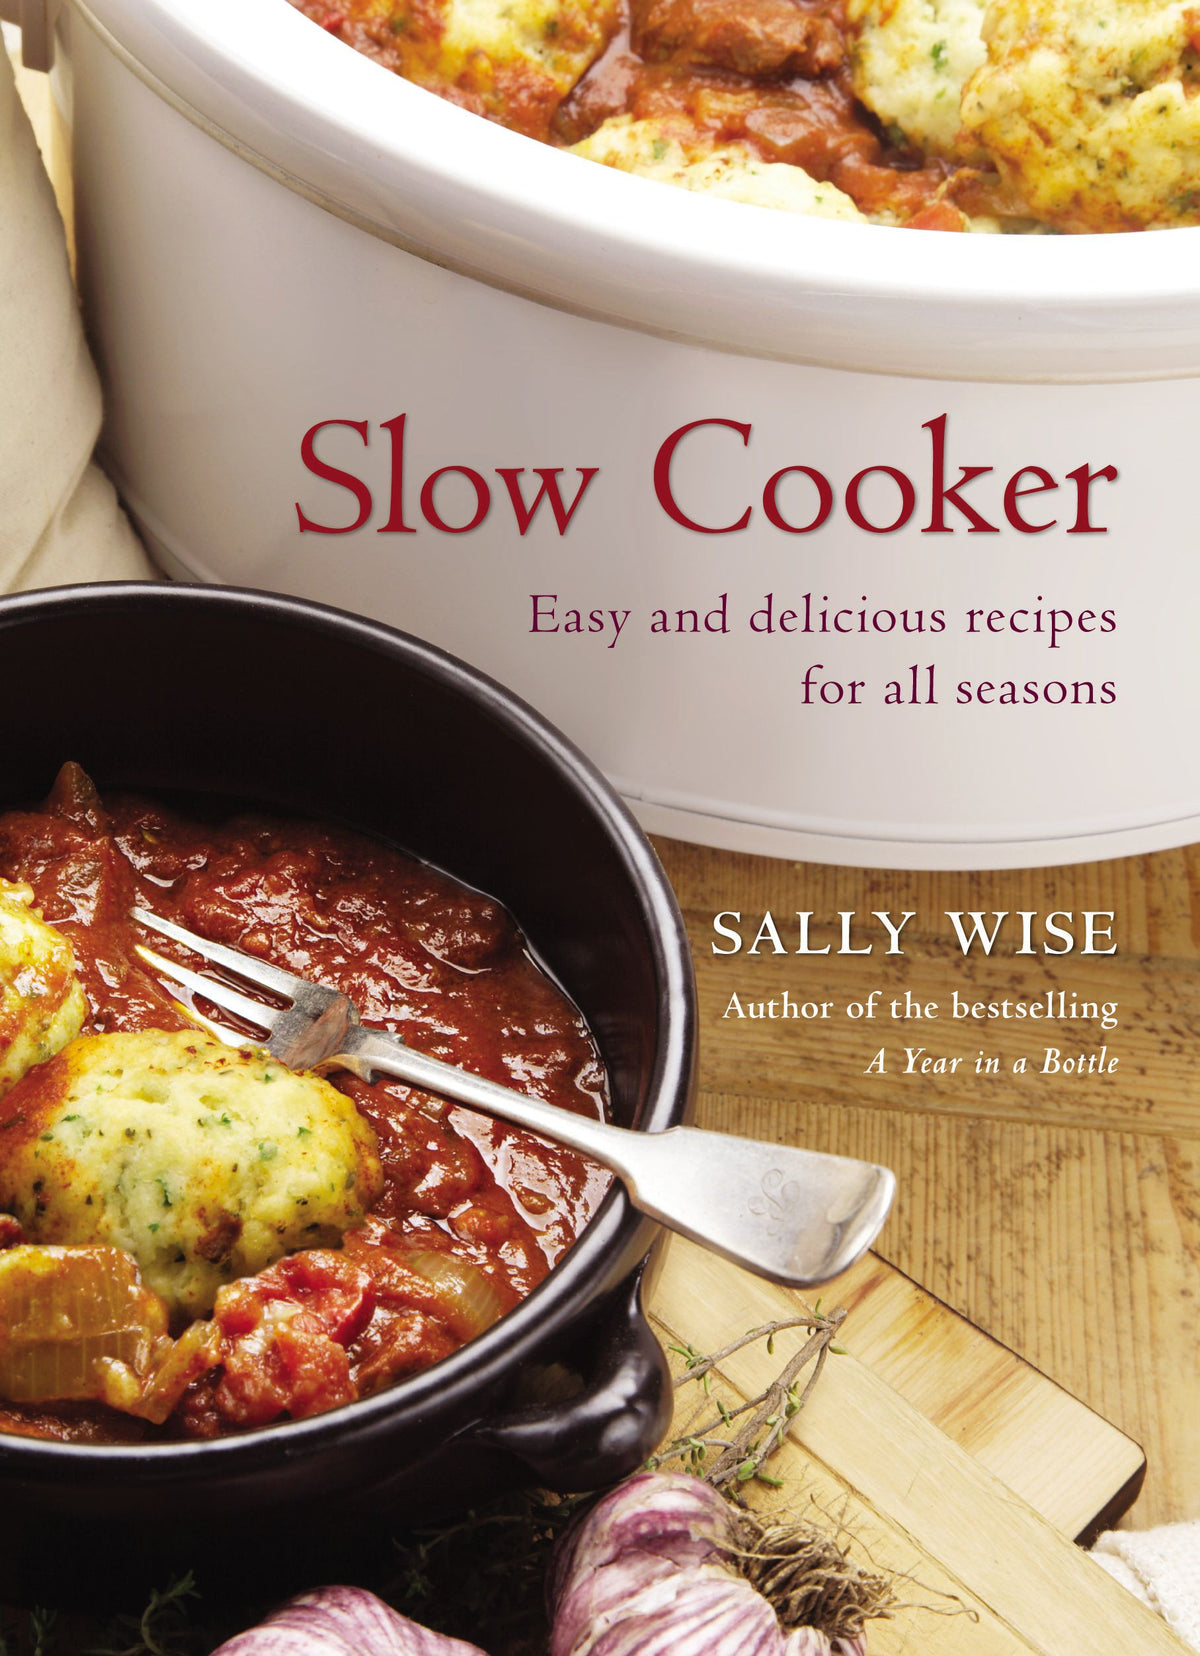 Slow Cooker (2)